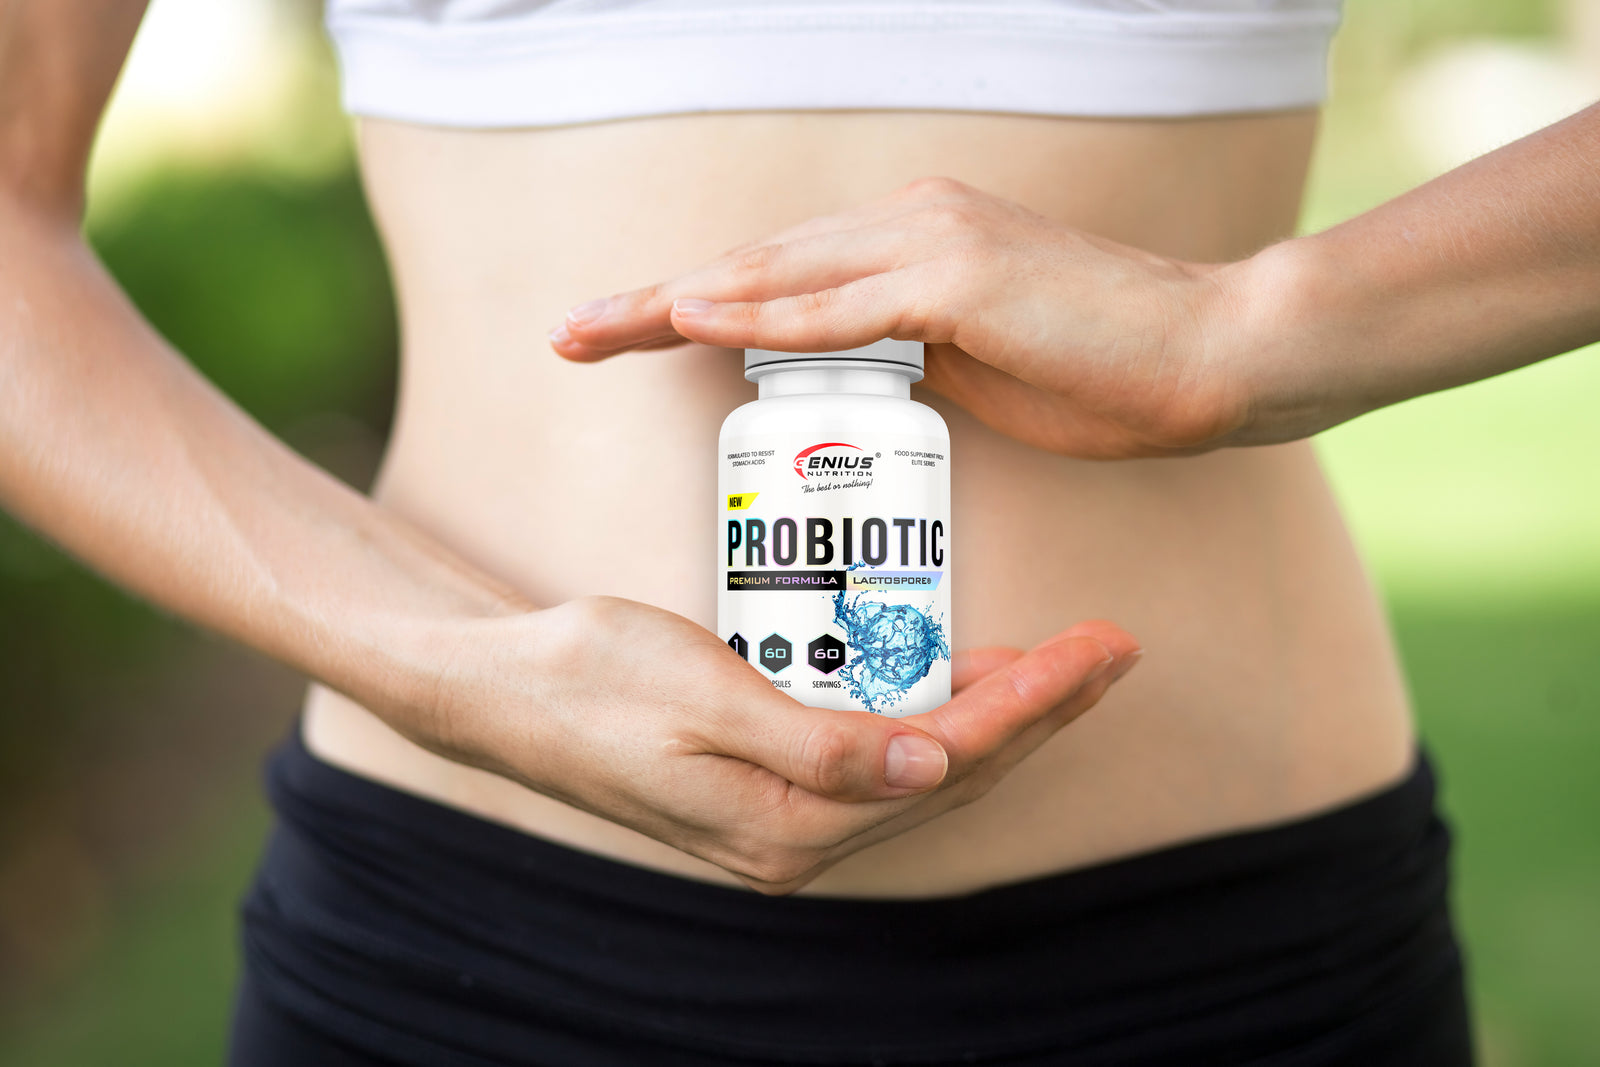 IMAGINE PRODUCING A GREAT MOOD BY ONLY TAKING PROBIOTICS AFTER TRAINING